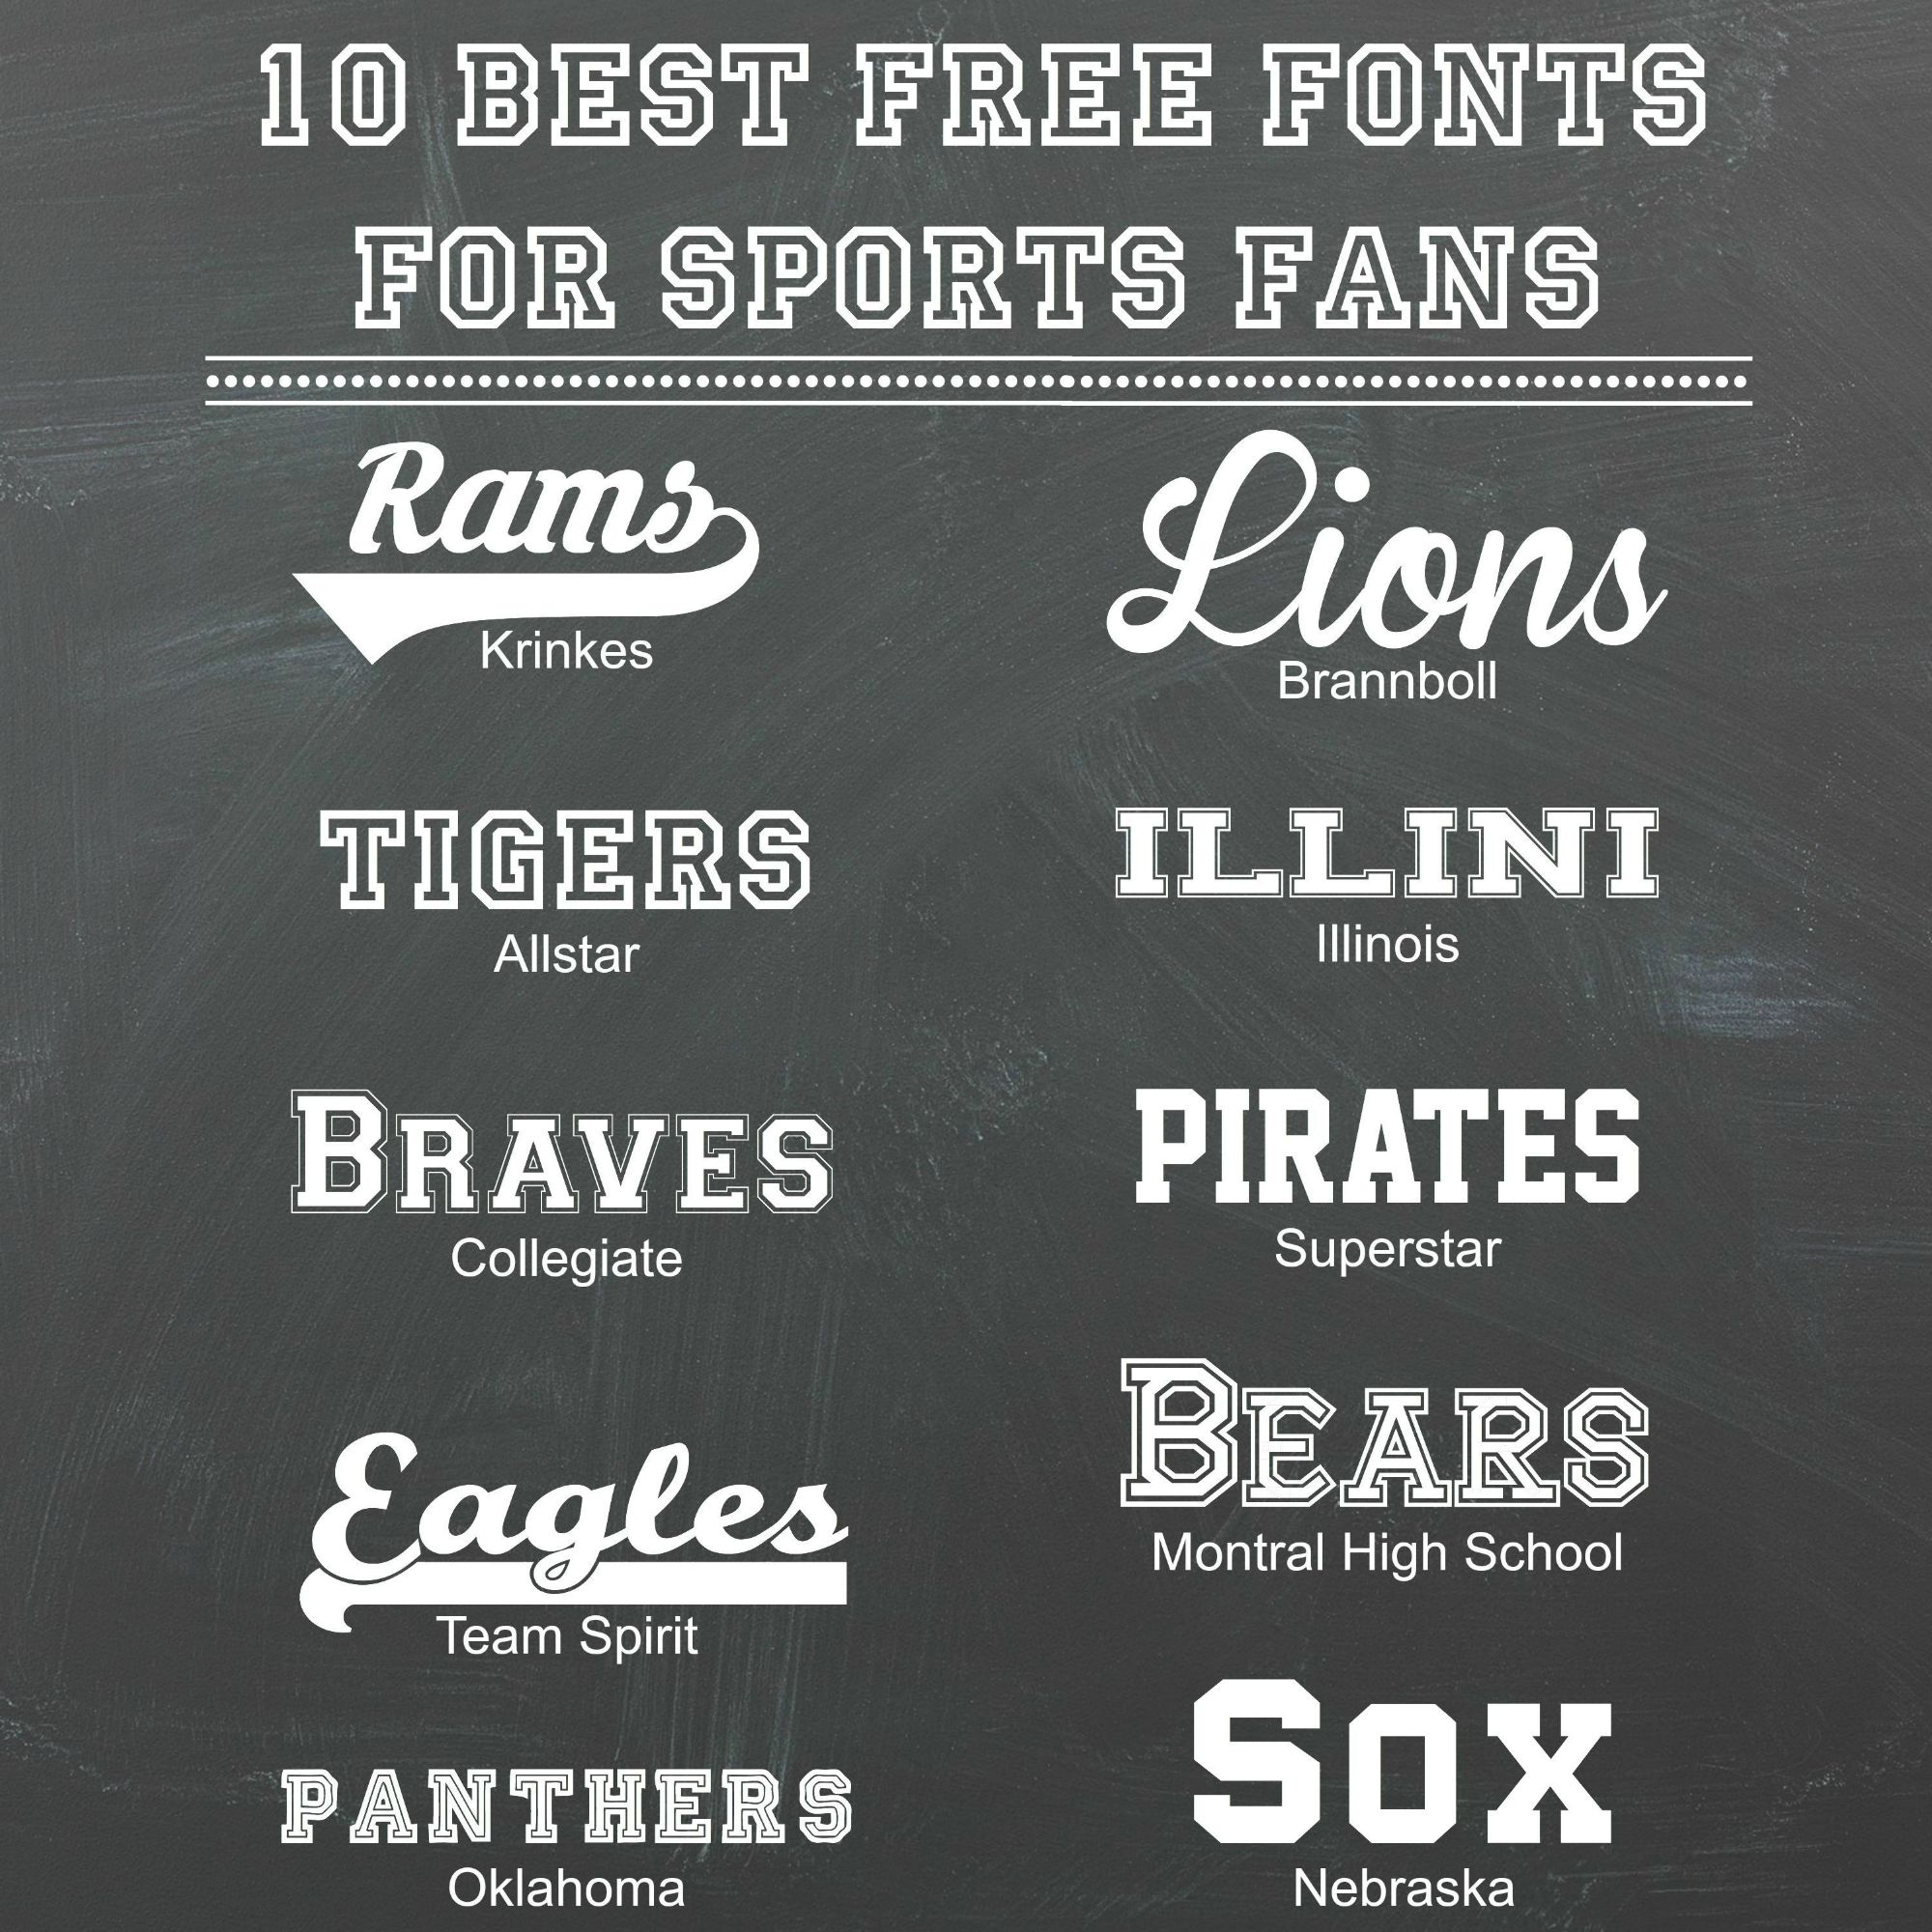 10 Best Free Fonts for Sports Fans